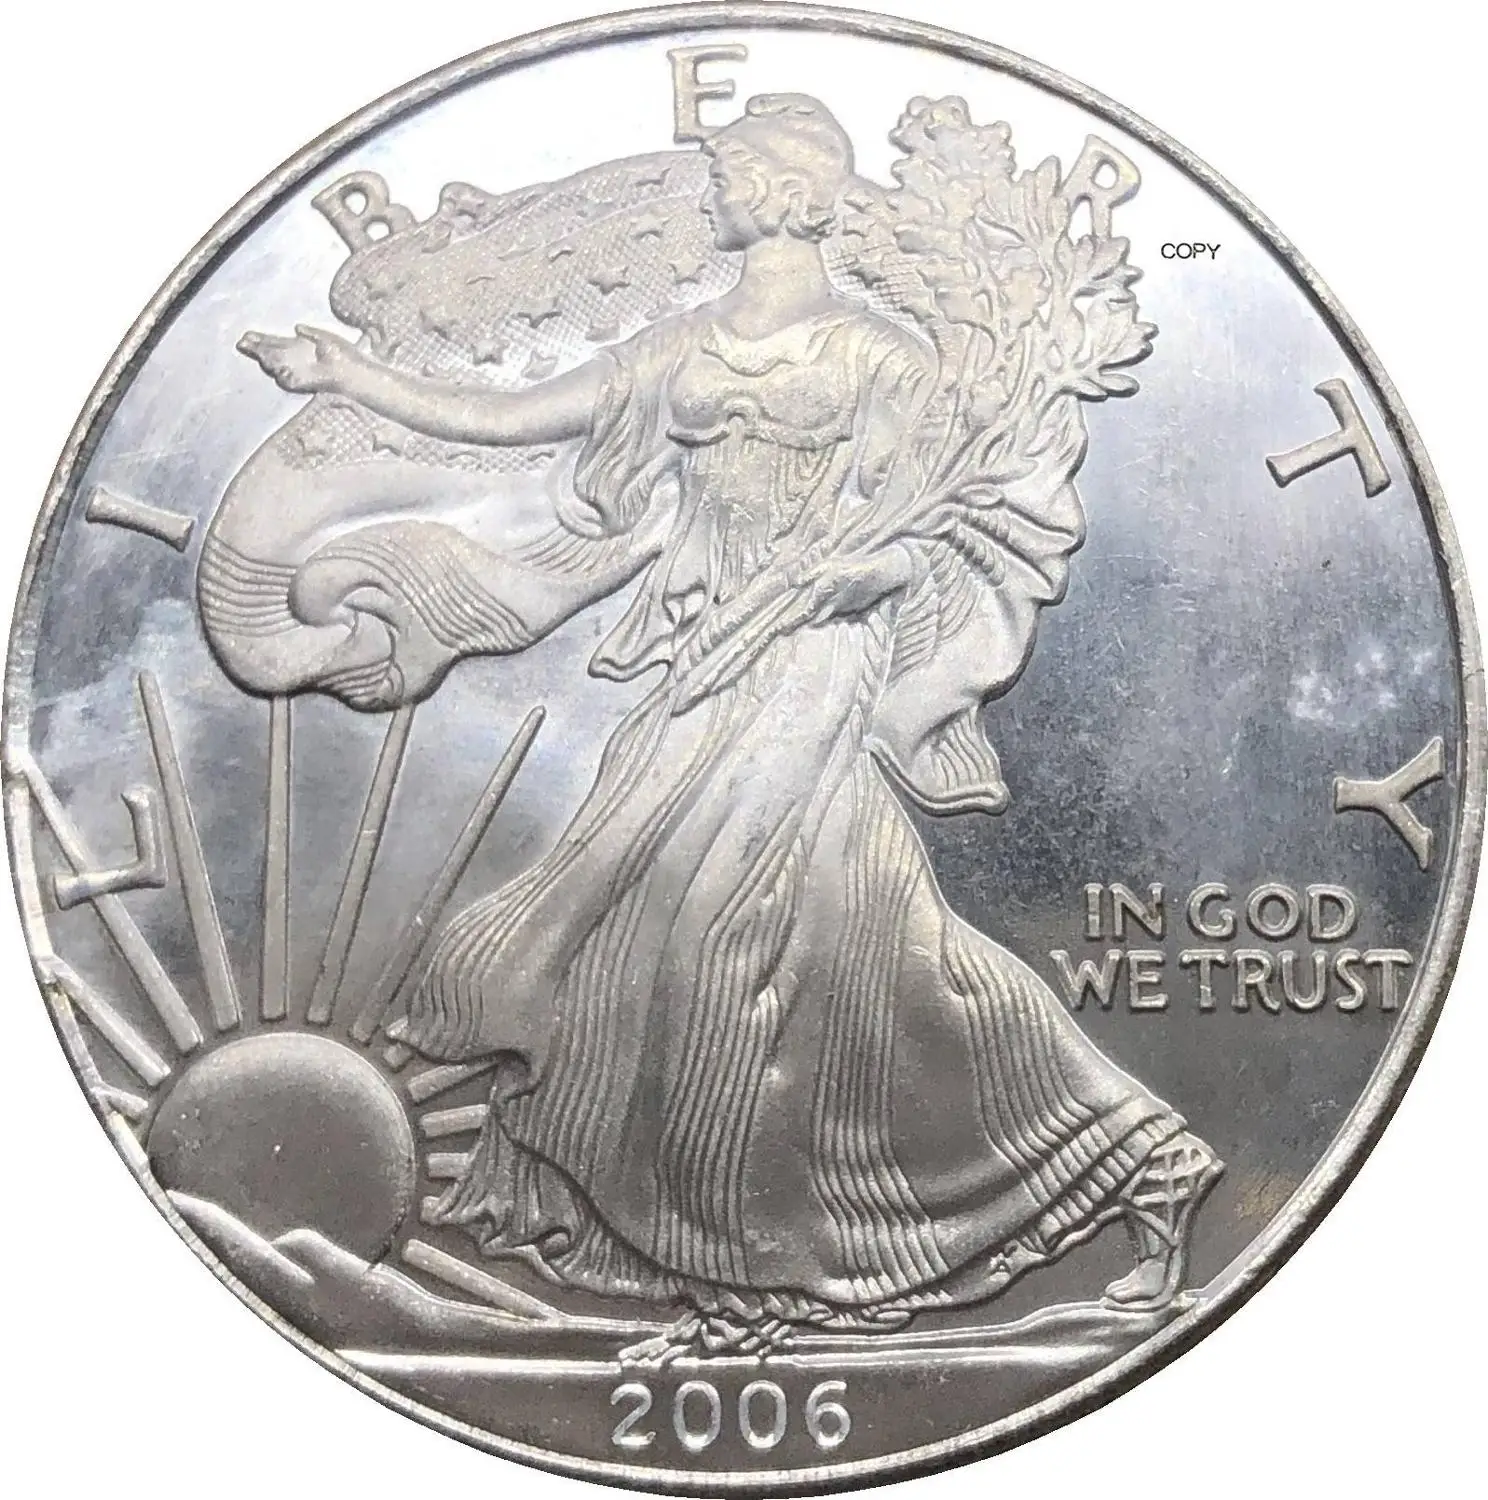 

United States 1 Dollar American Silver Eagle Bullion Coin 2006 W Type Plated Silver Commemorative Coin Copy coin